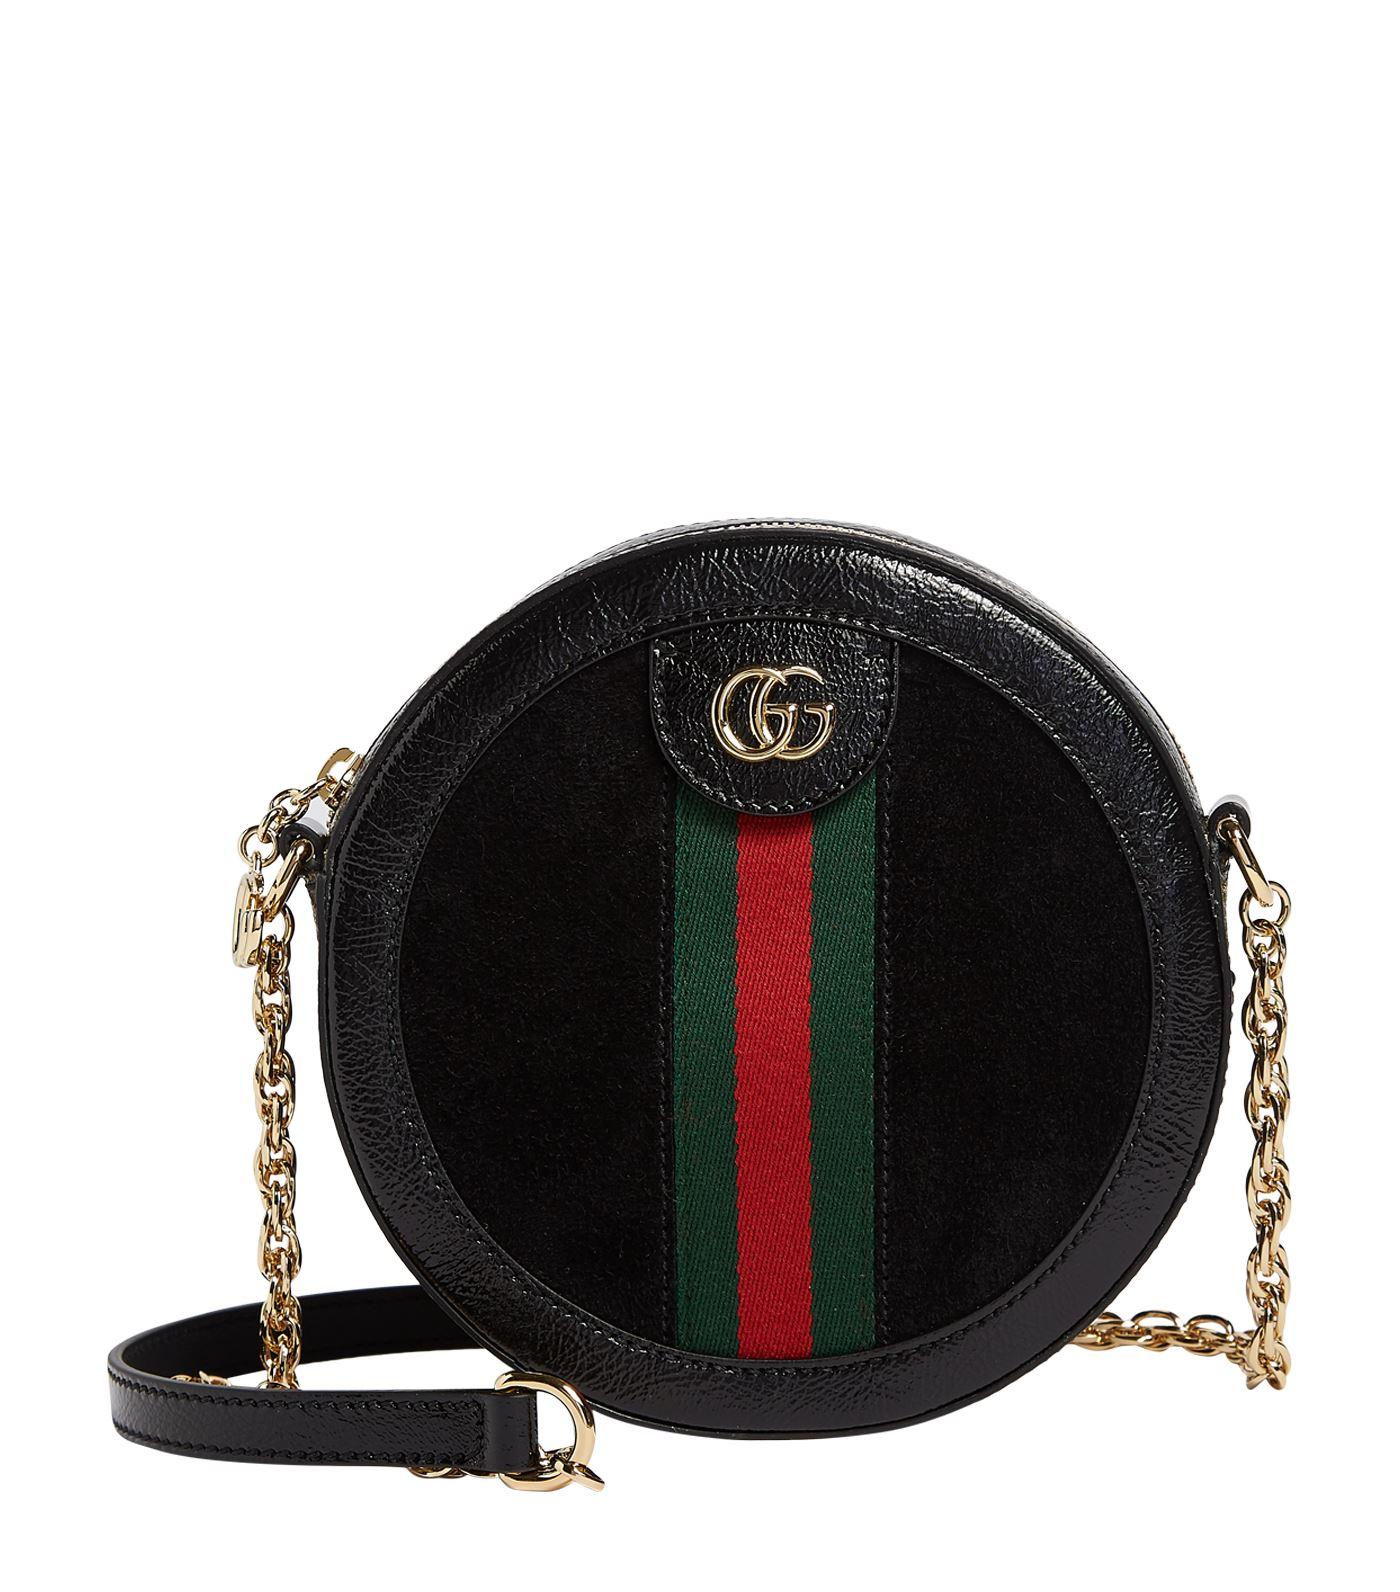 Gucci Suede Mini Leather Round Ophidia Shoulder Bag in Black - Lyst